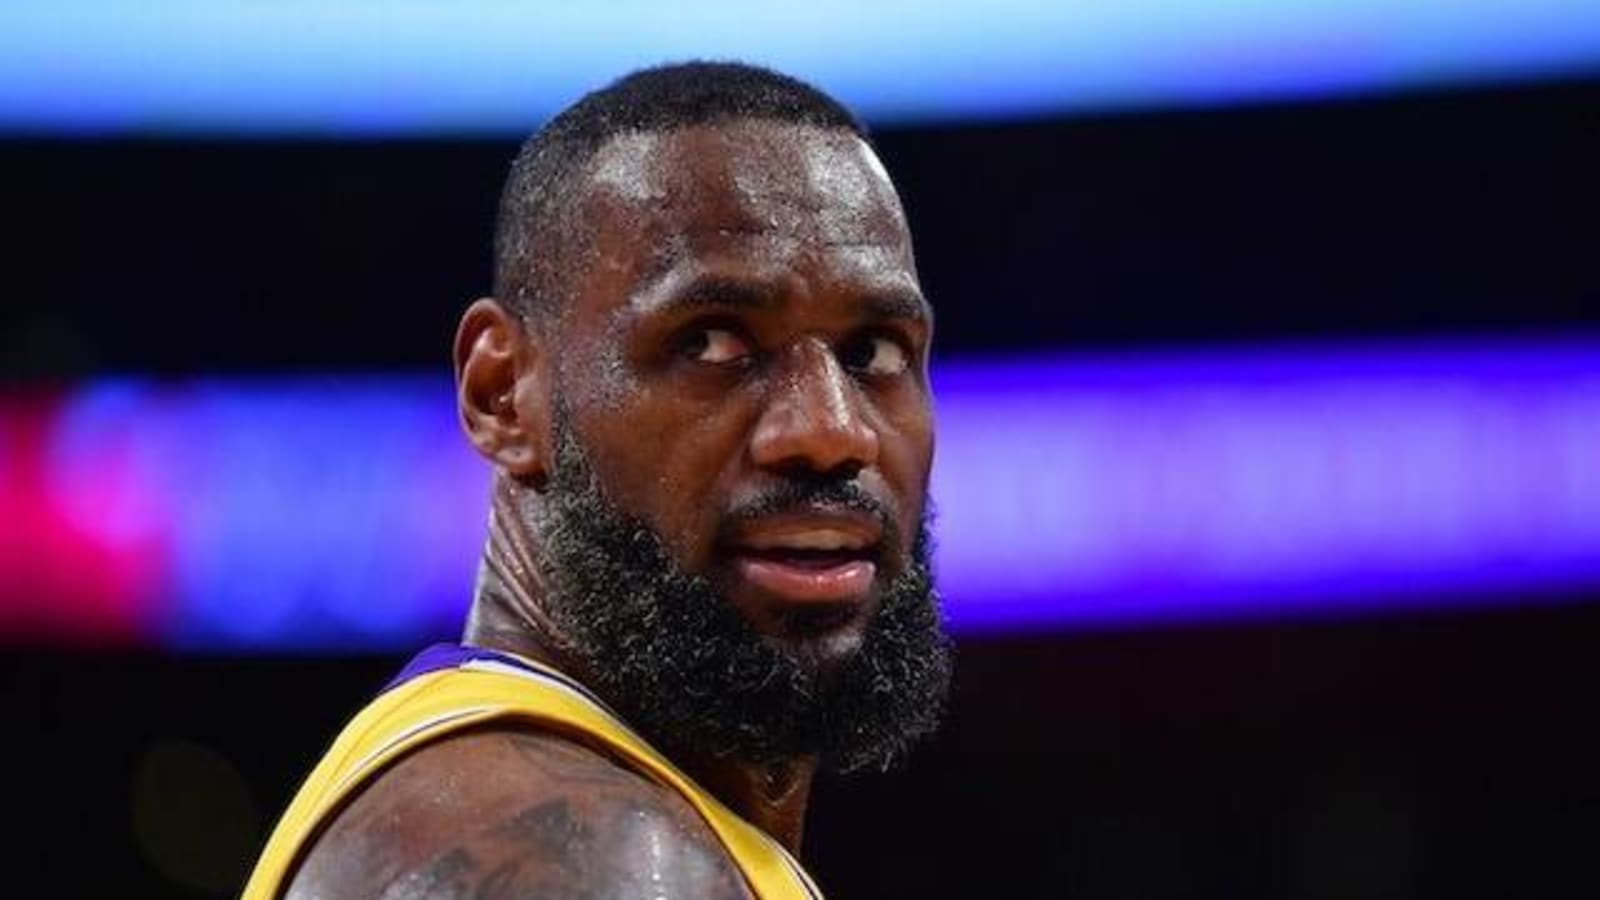  LeBron James ‘Exceeded Expectations’ With 20th Consecutive All-Star Starter Selection